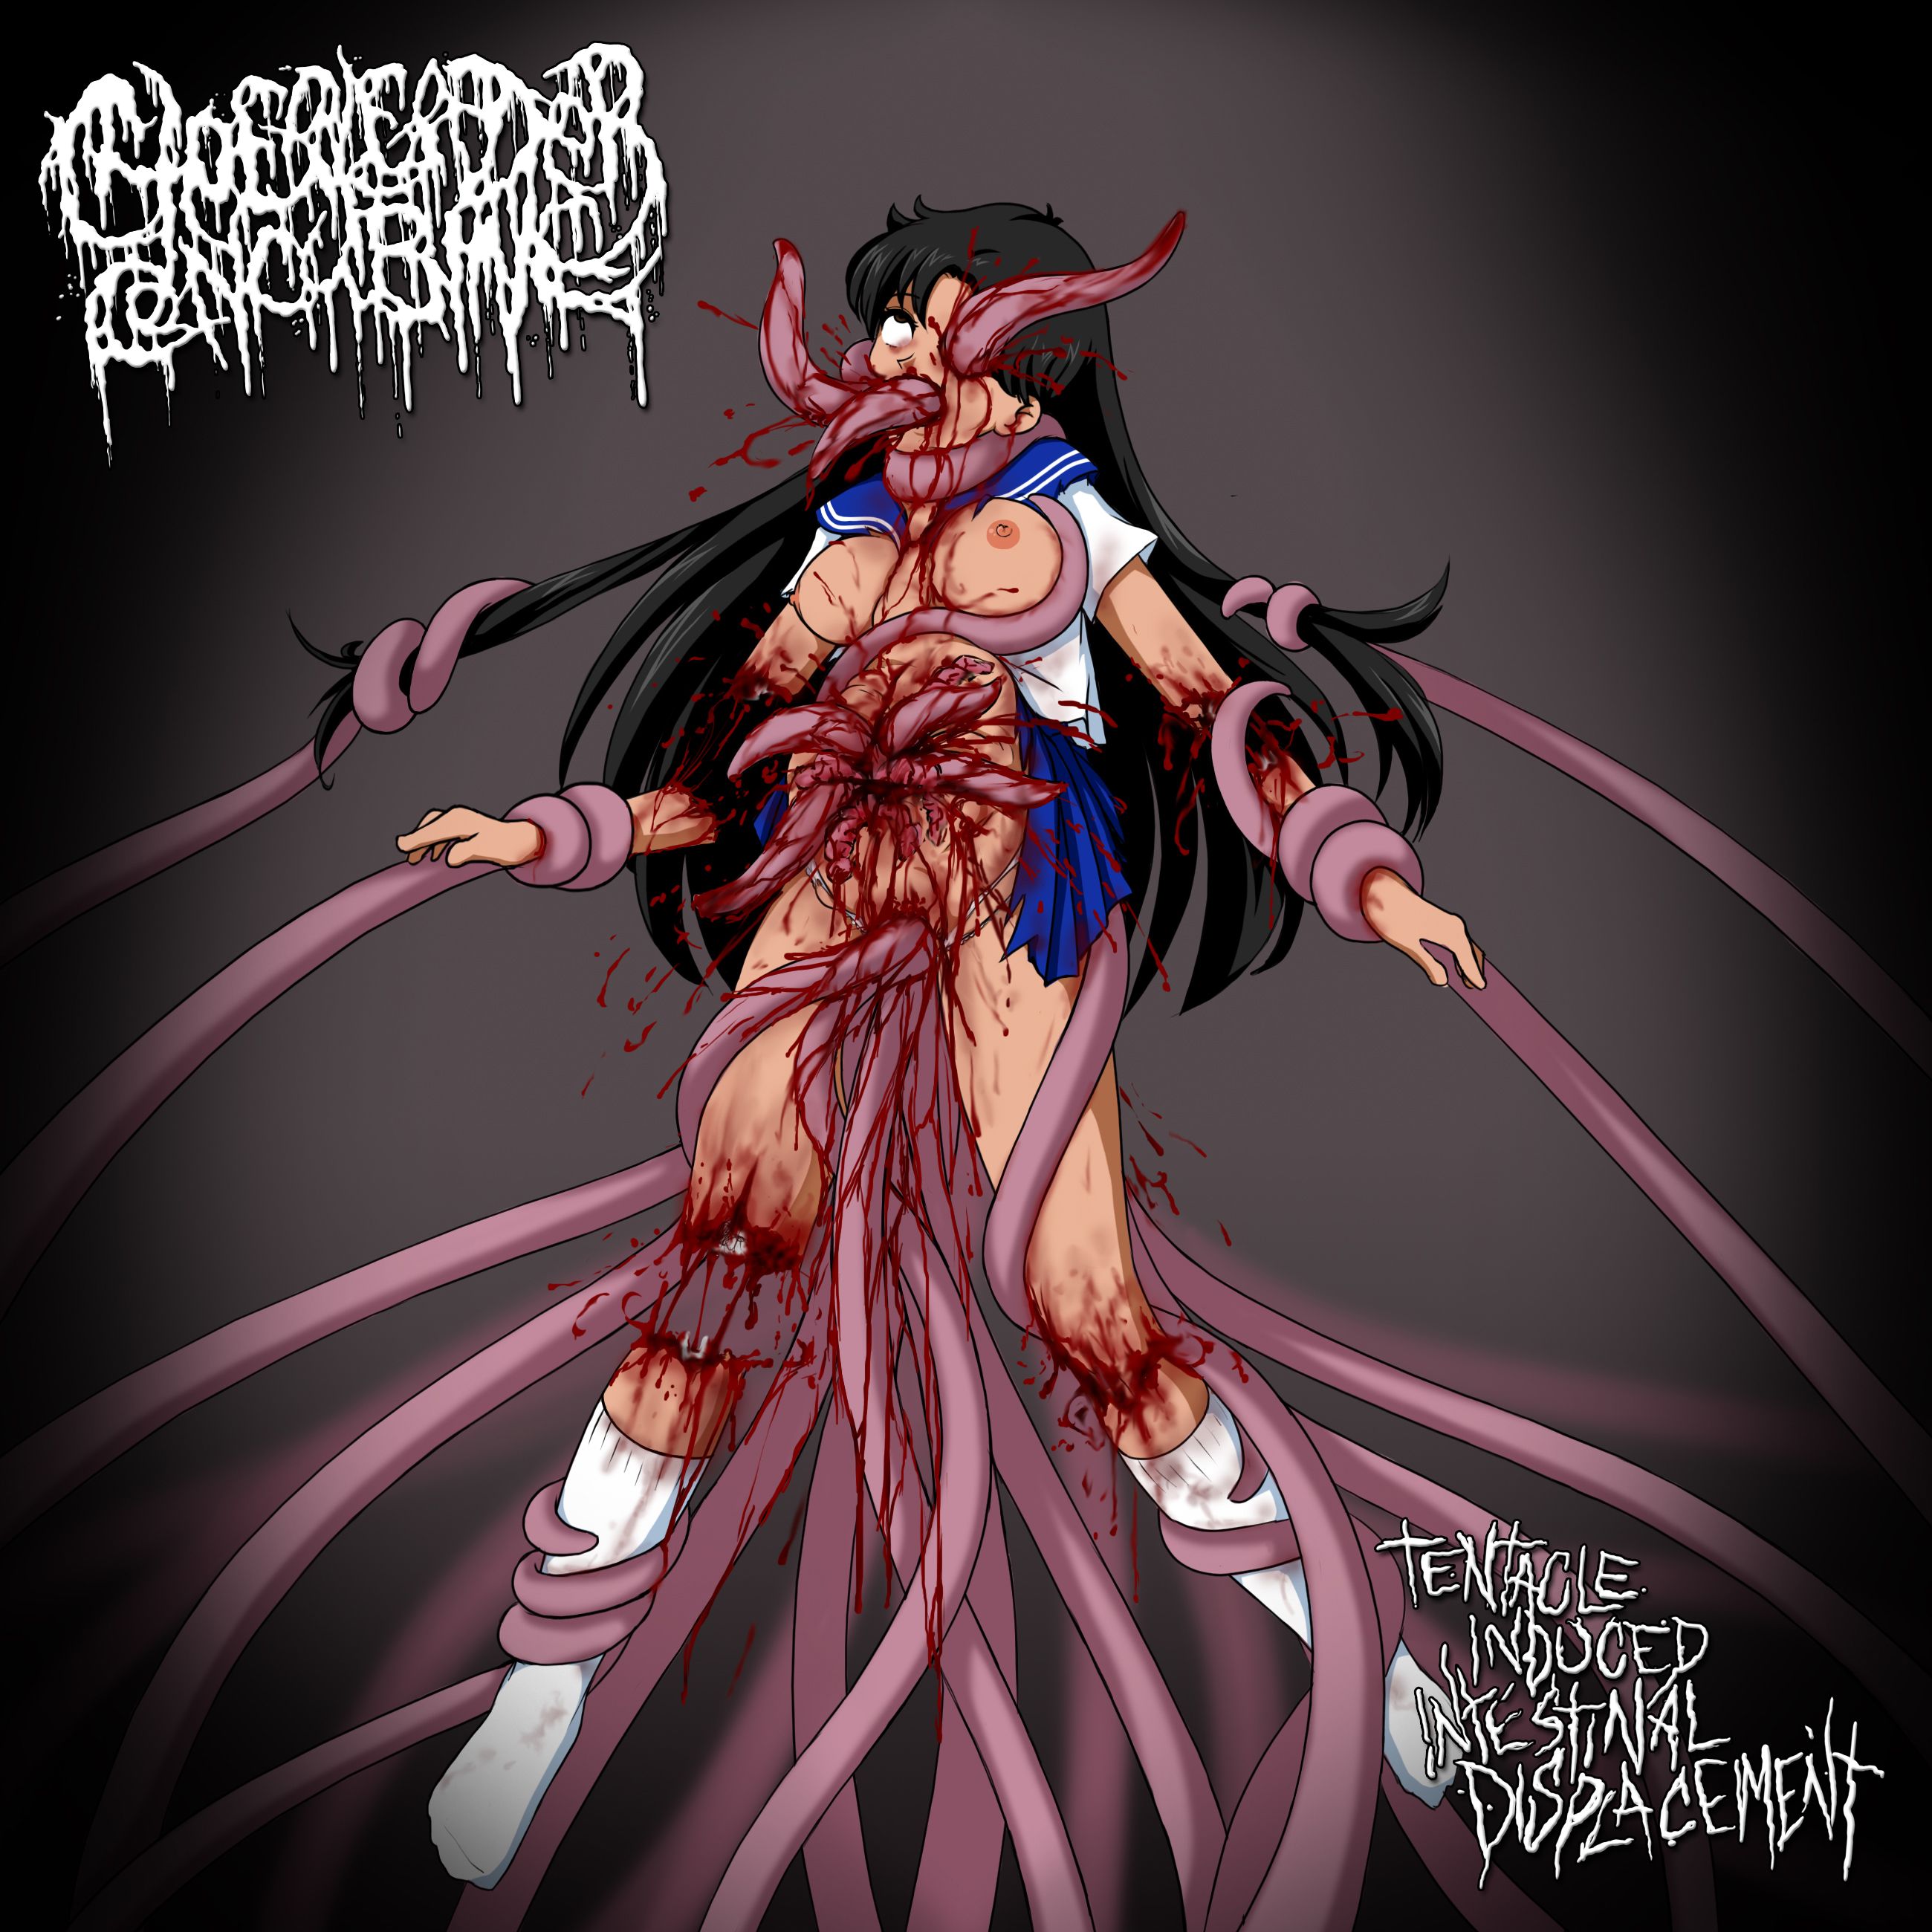 Cheerleader Extreme Porn - Metal Area - Extreme Music Portal > Cheerleader Concubine - Tentacle  Induced Intestinal Displacement (2016)